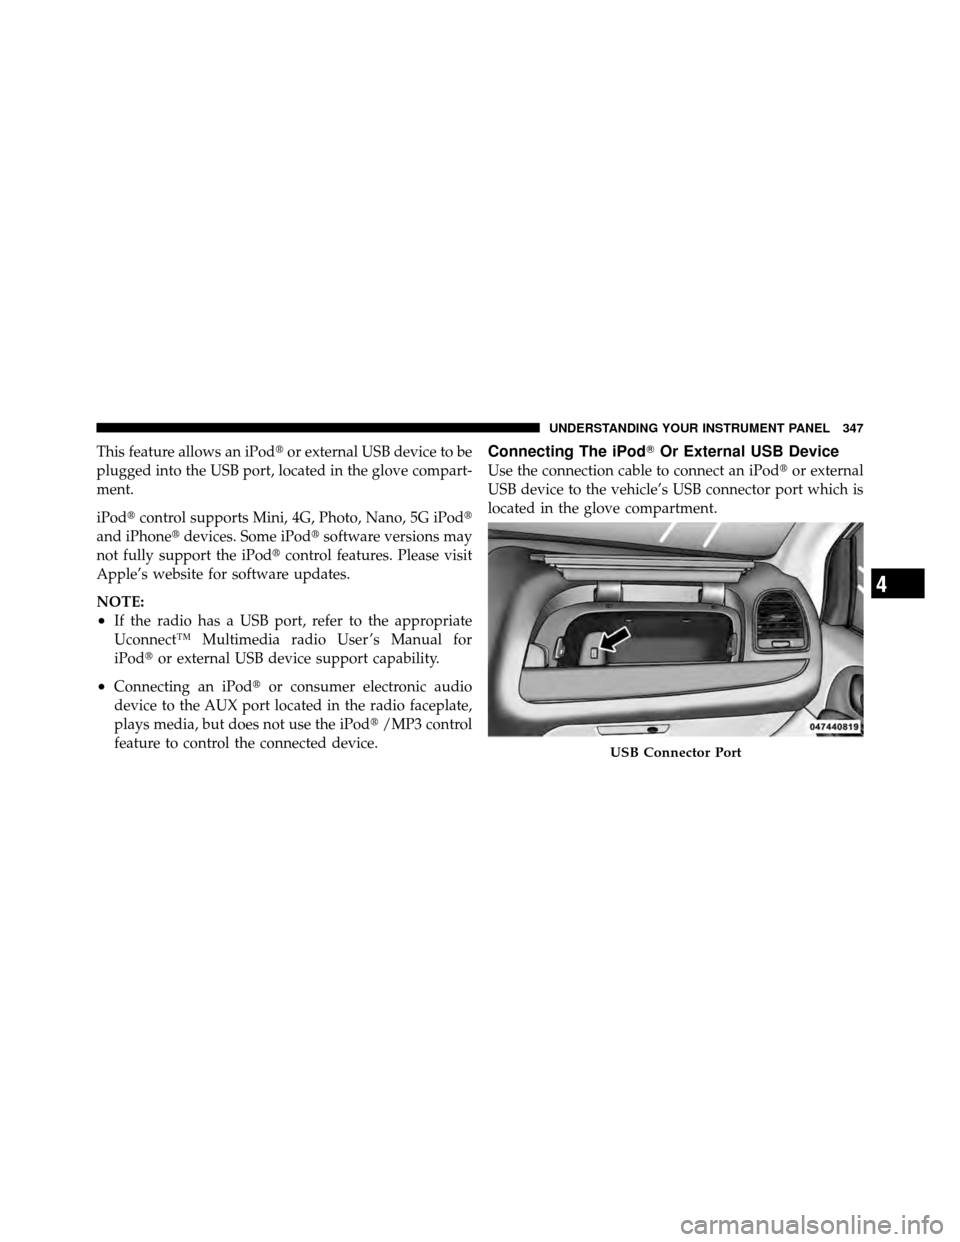 DODGE GRAND CARAVAN 2012 5.G Owners Manual This feature allows an iPodor external USB device to be
plugged into the USB port, located in the glove compart-
ment.
iPod control supports Mini, 4G, Photo, Nano, 5G iPod
and iPhone devices. Some